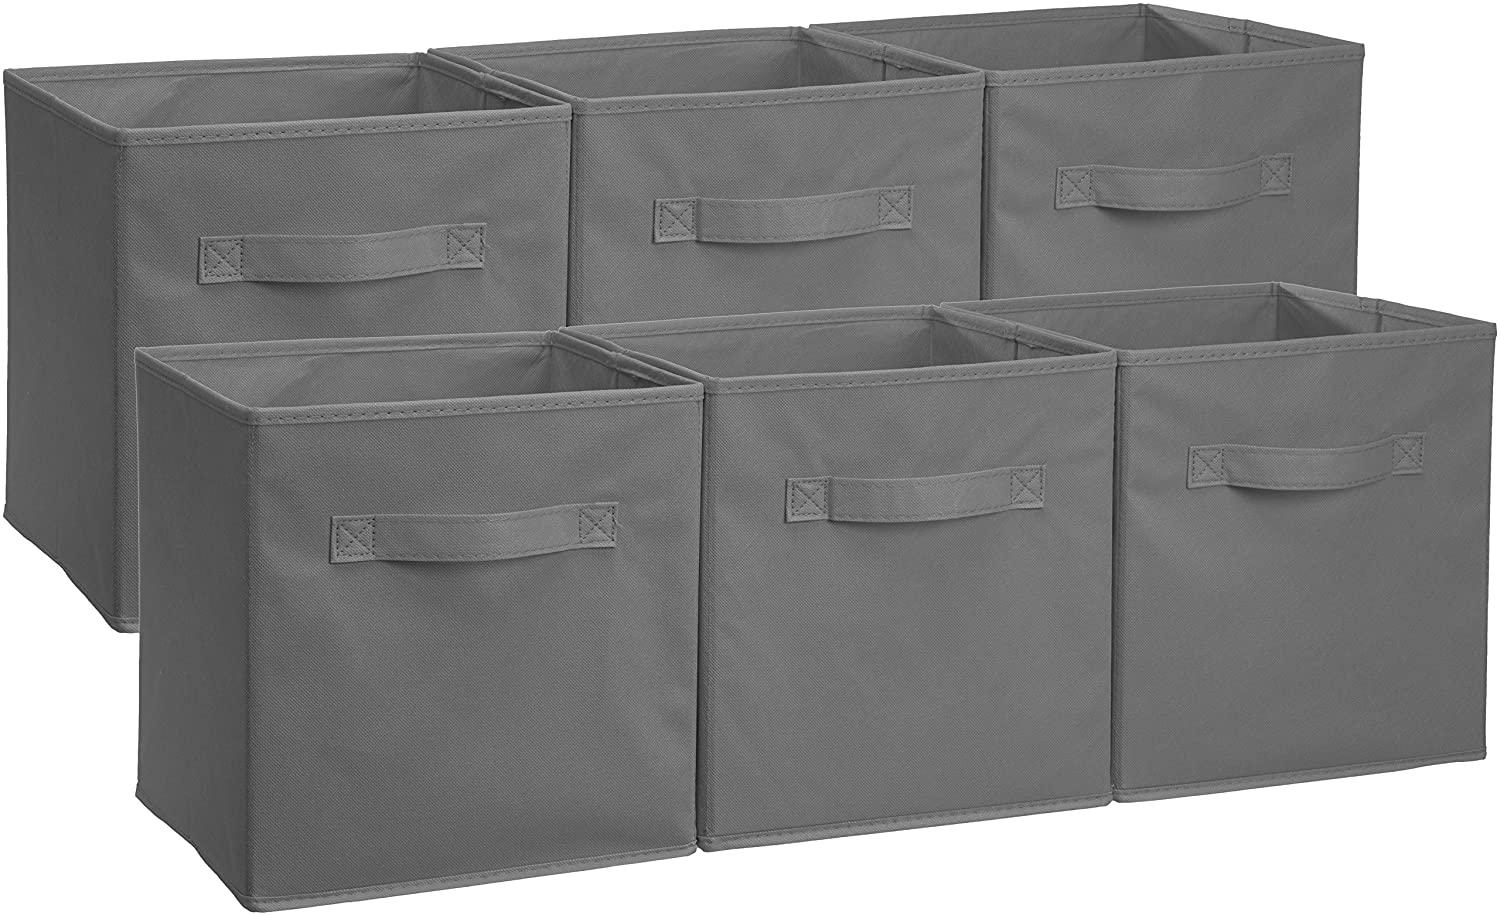 6 AmazonBasics Collapsible Fabric Storage Cubes for $11.09 Shipped